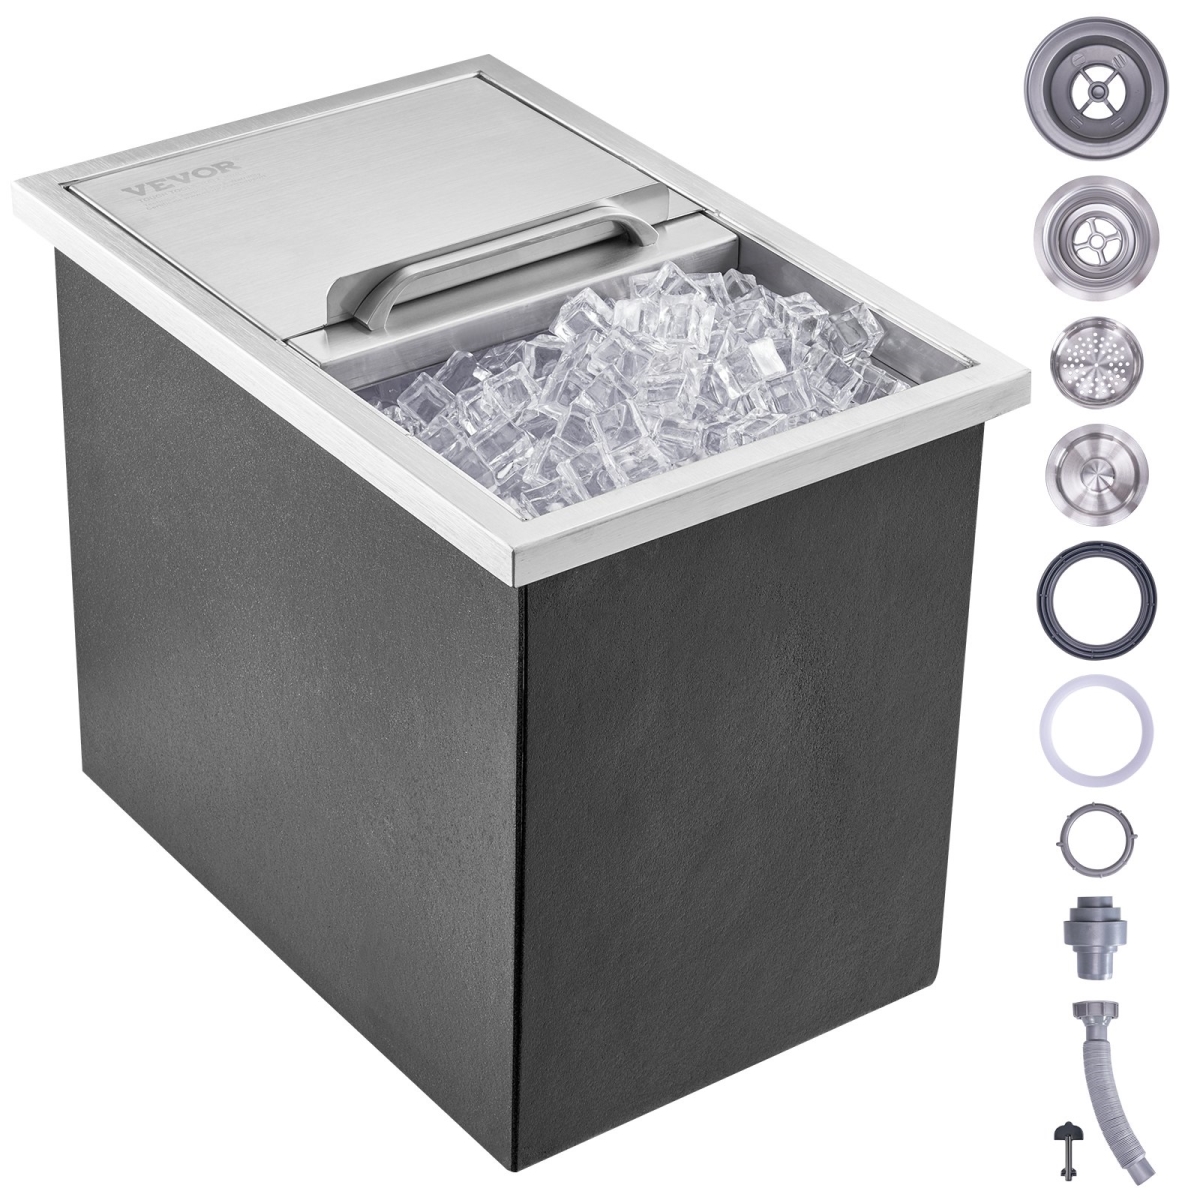 Picture of Vevor QRSCBCHG18LXZOFABV0 18 x 12 x 14.5 in. Drop in Ice Chest Stainless Steel Ice Cooler Commercial Ice Bin with Cover 40.9 qt.